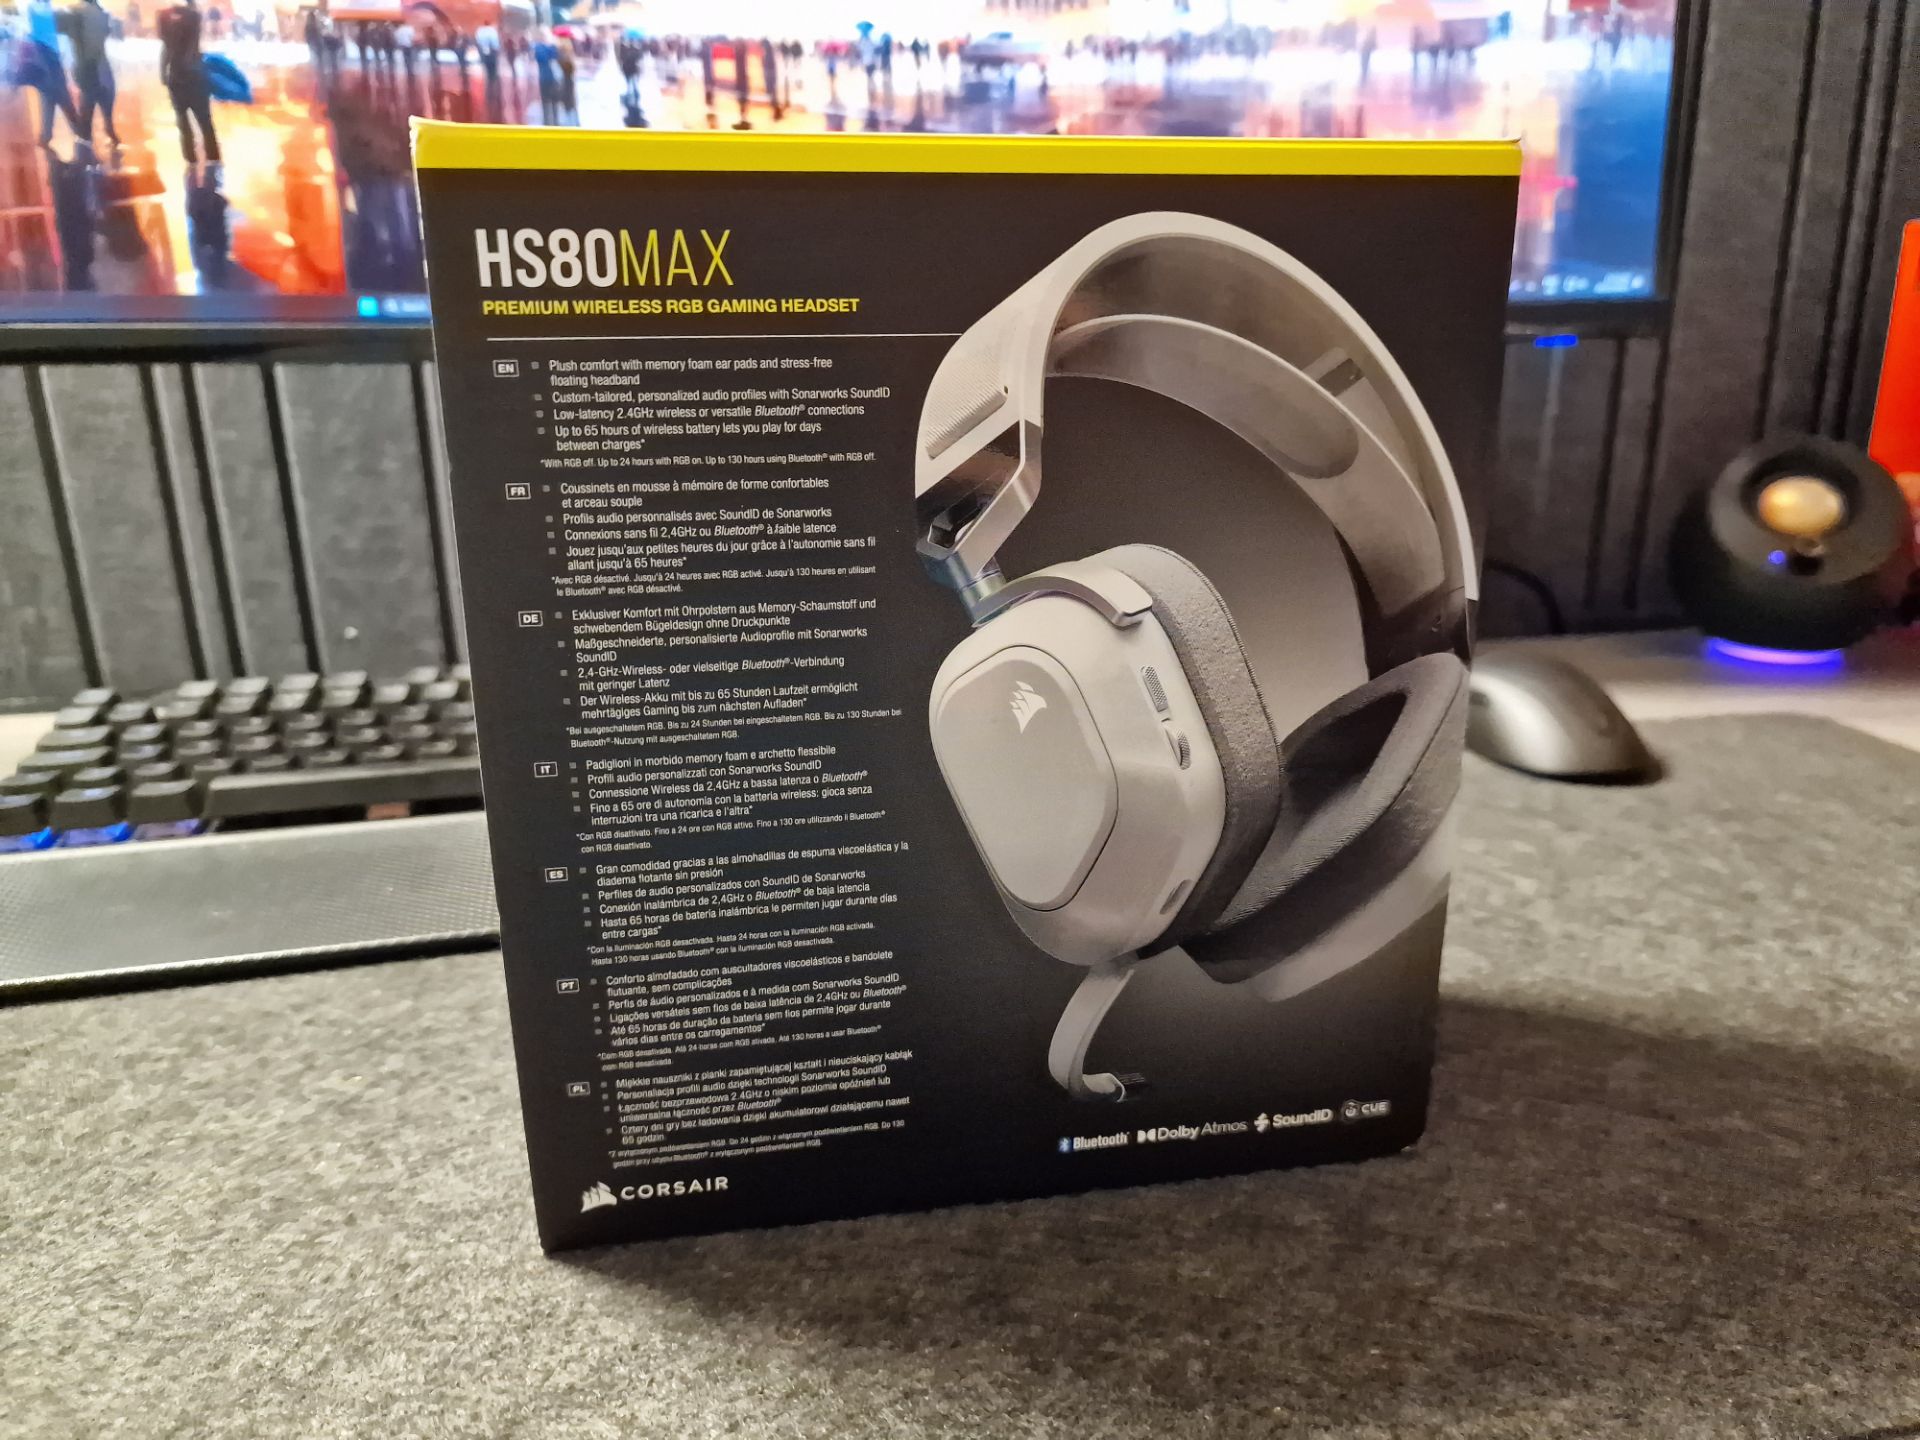 Corsair HS80 MAX Review - The Package